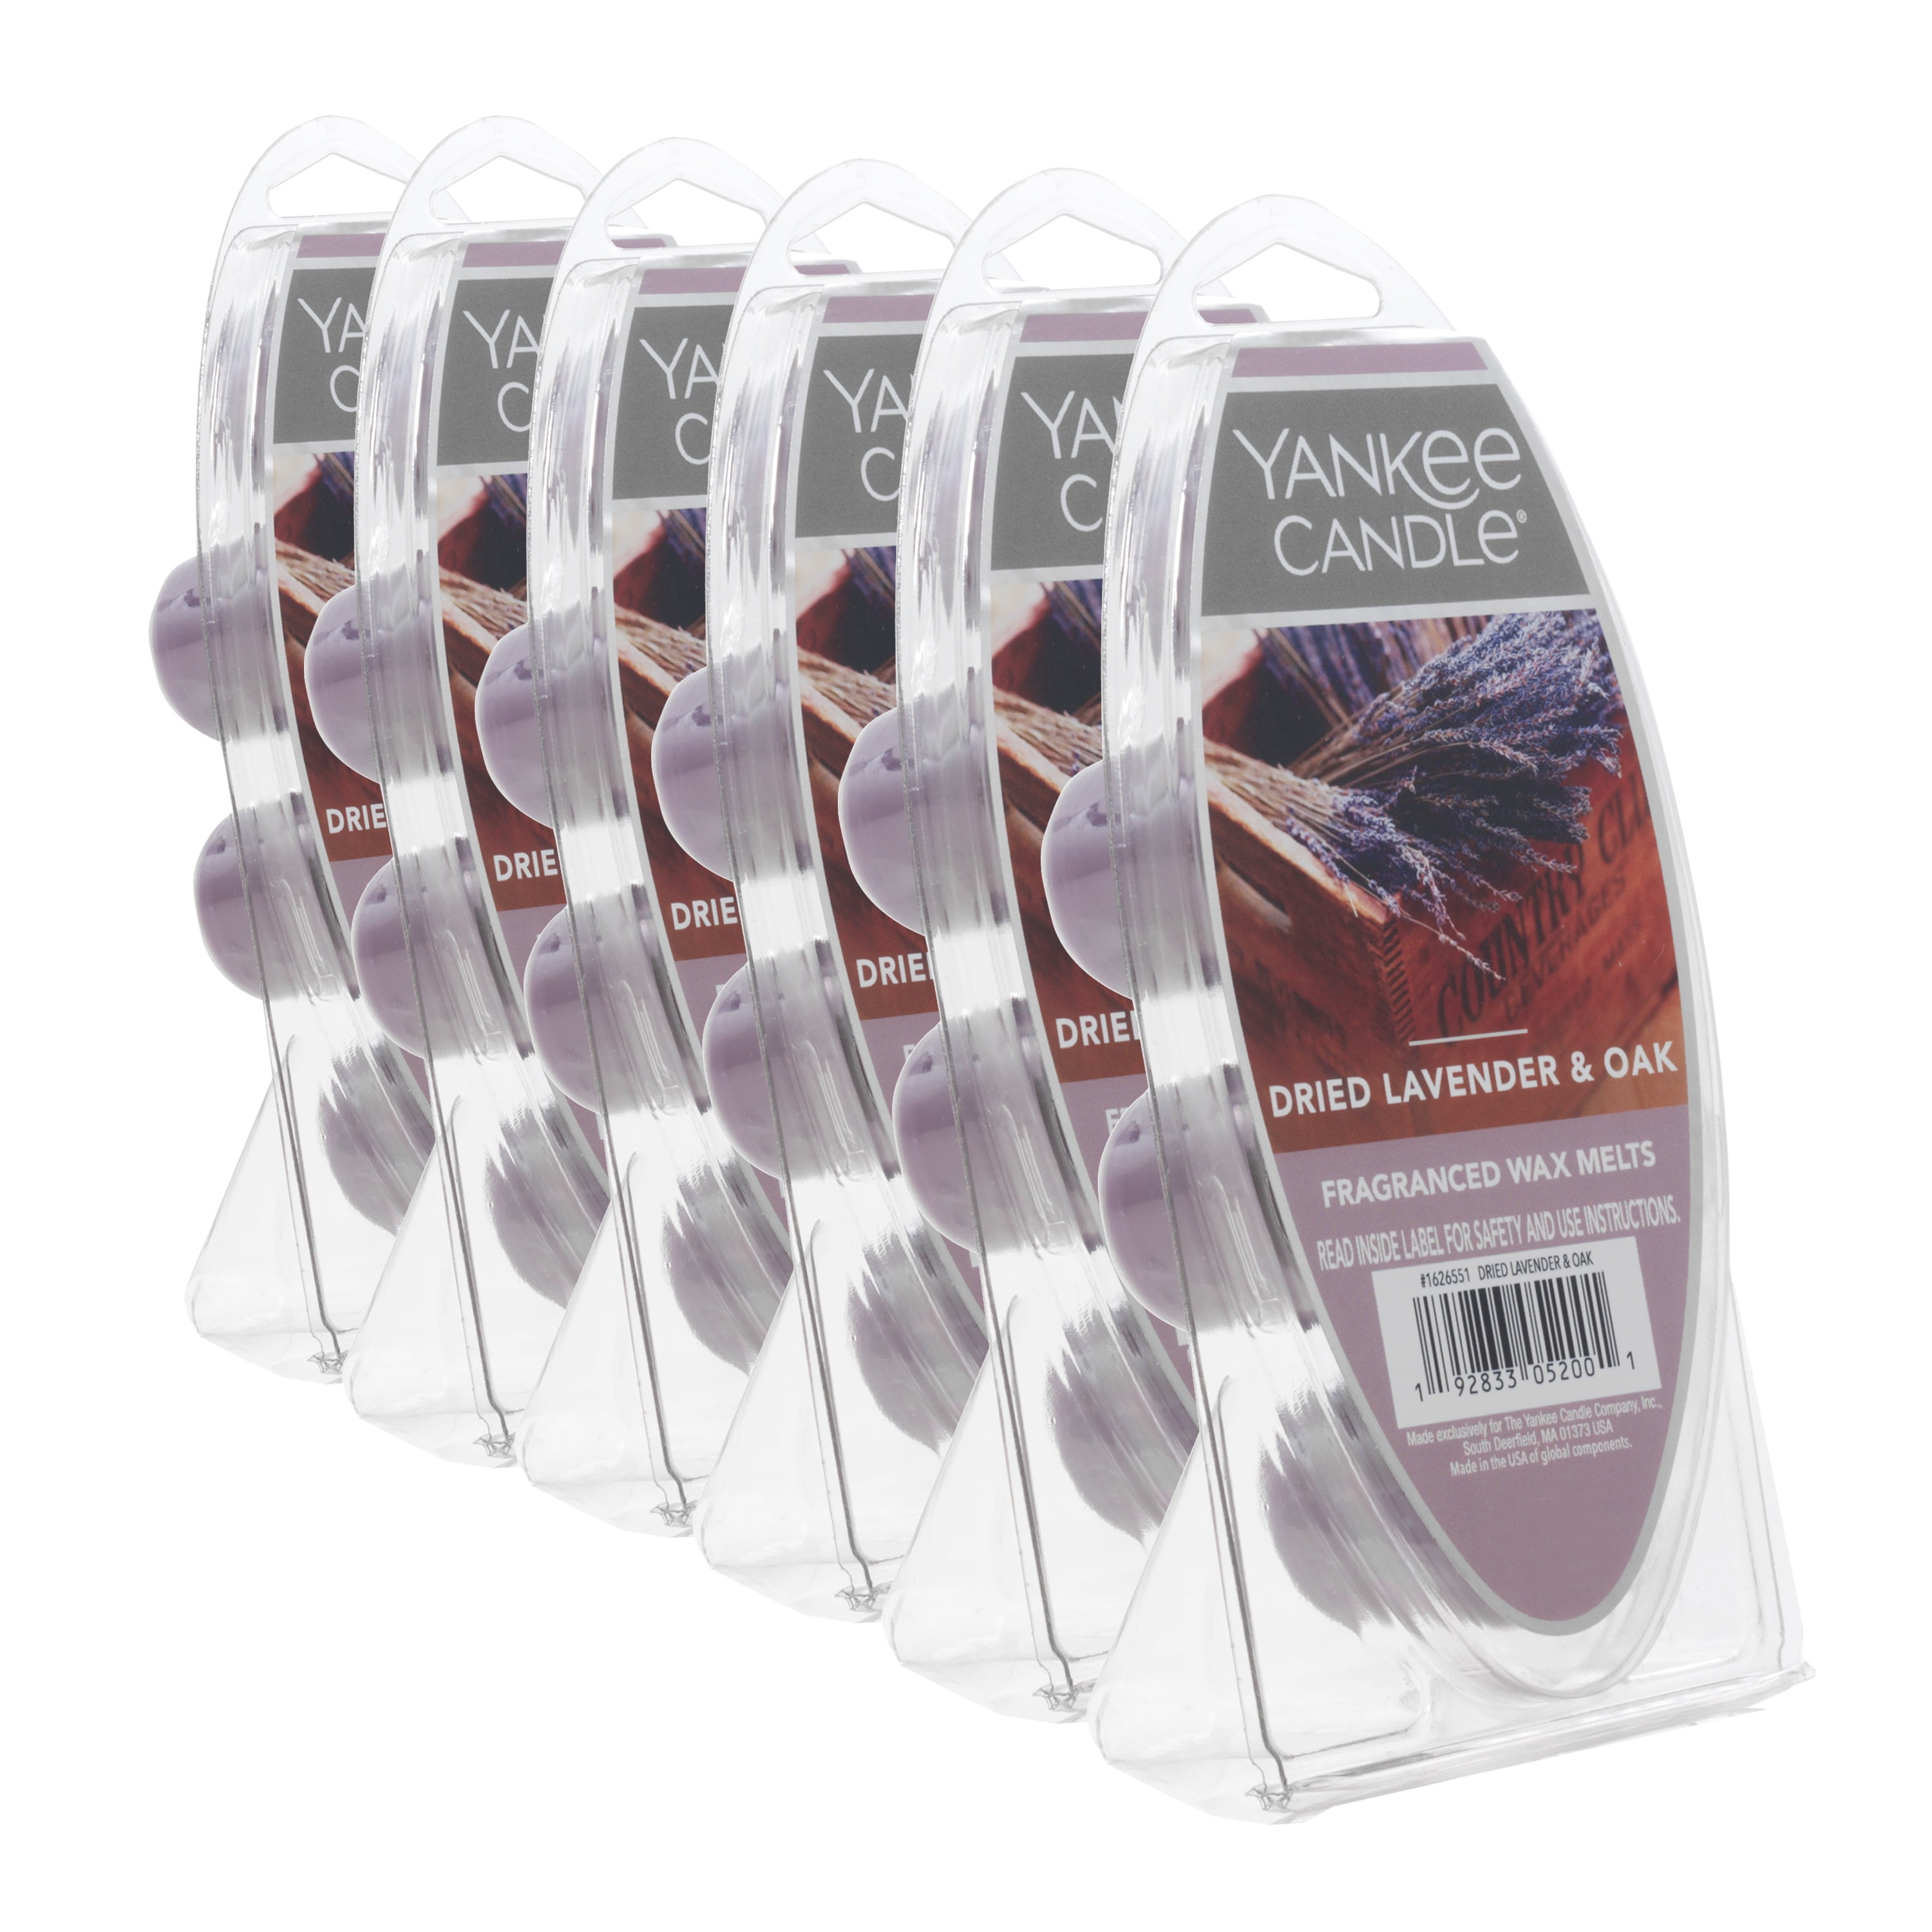 Yankee Candle Dried Lavender and Oak Wax Melts, 1 Pack of 6